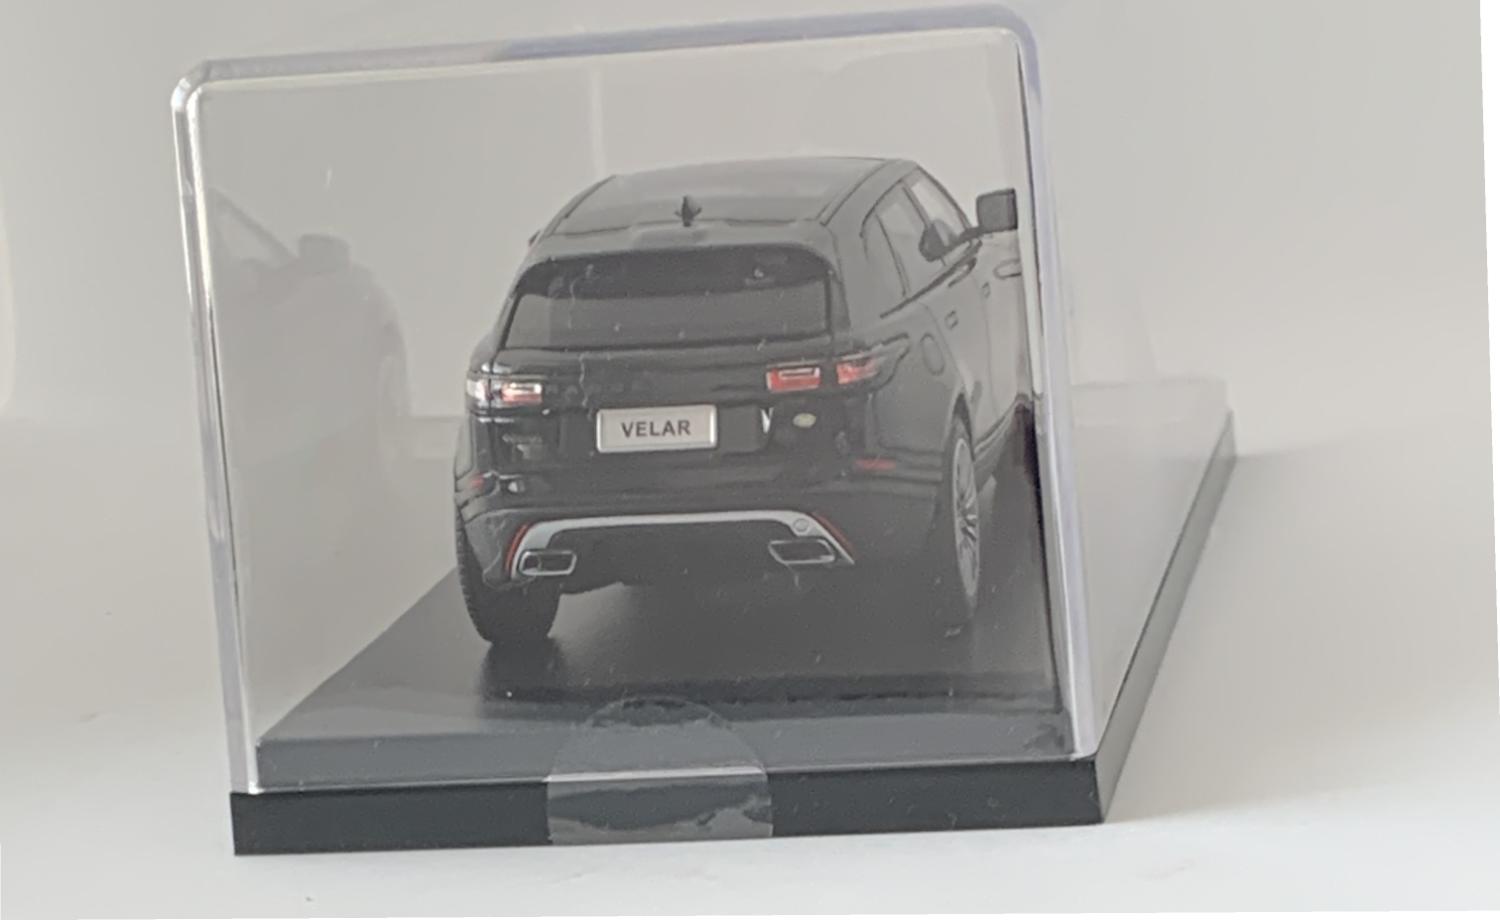 A very high quality accurate representation of the Land Rover Range Rover Evoque First Edition decorated in black with black panoramic roof, rear top spoiler with dark grey and silver wheels.